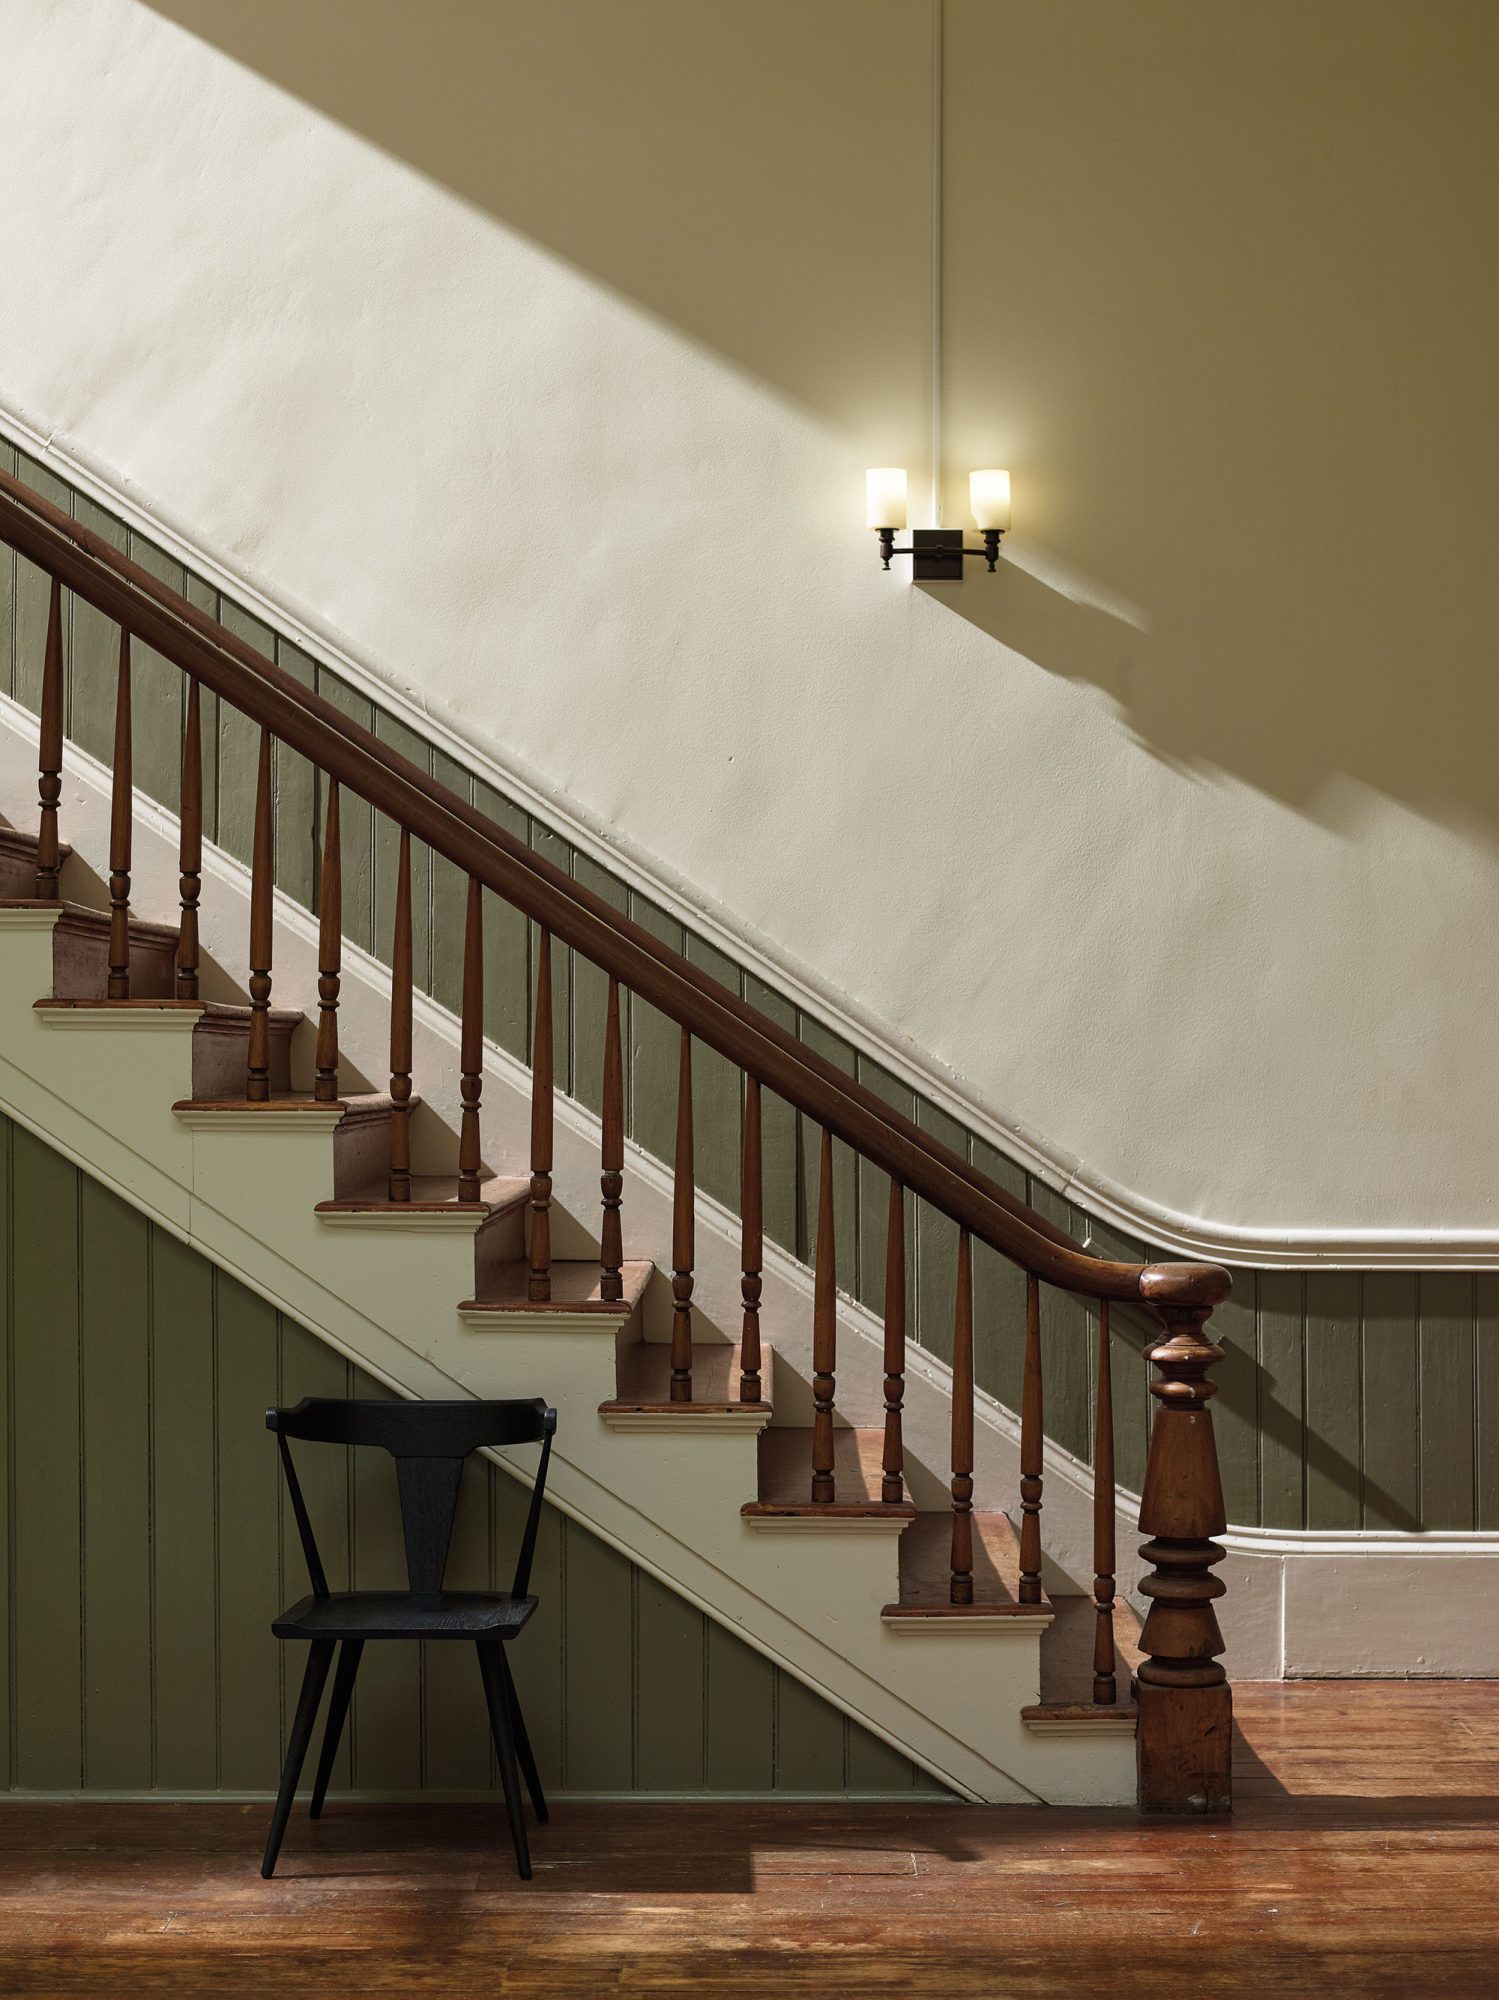 A single light fixture casts long shadows along a plain white wall behind an ornate wooden staircase